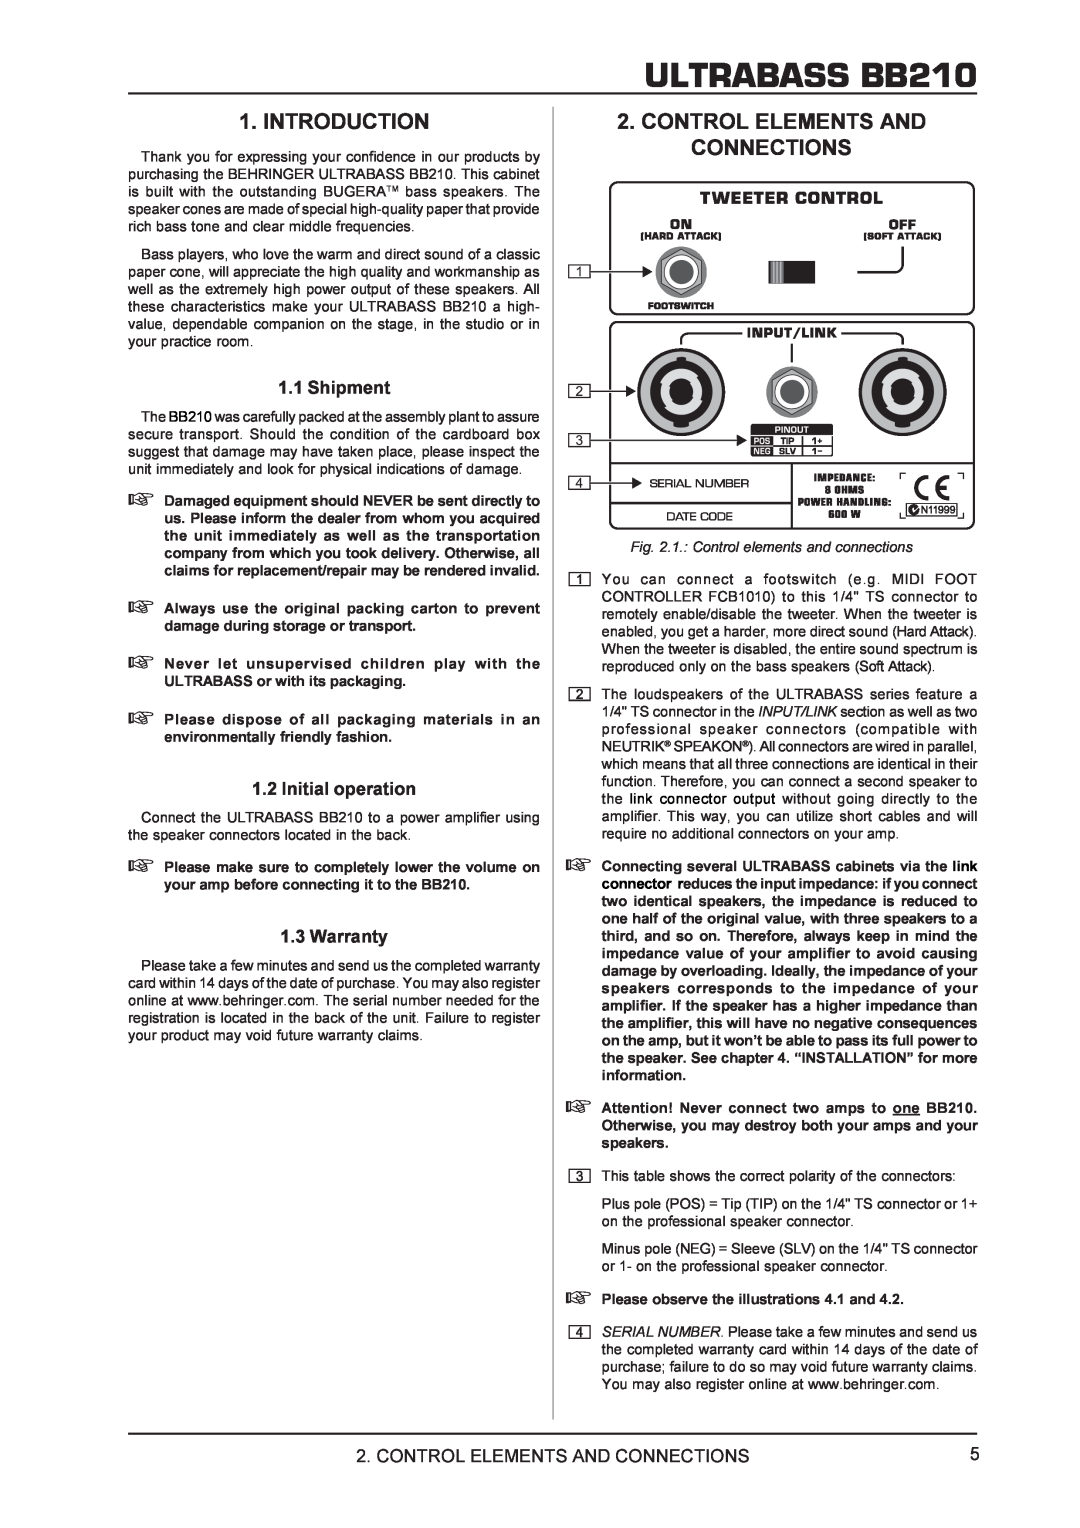 Behringer manual Introduction, Control Elements And Connections, ULTRABASS BB210, Shipment, Initial operation, Warranty 